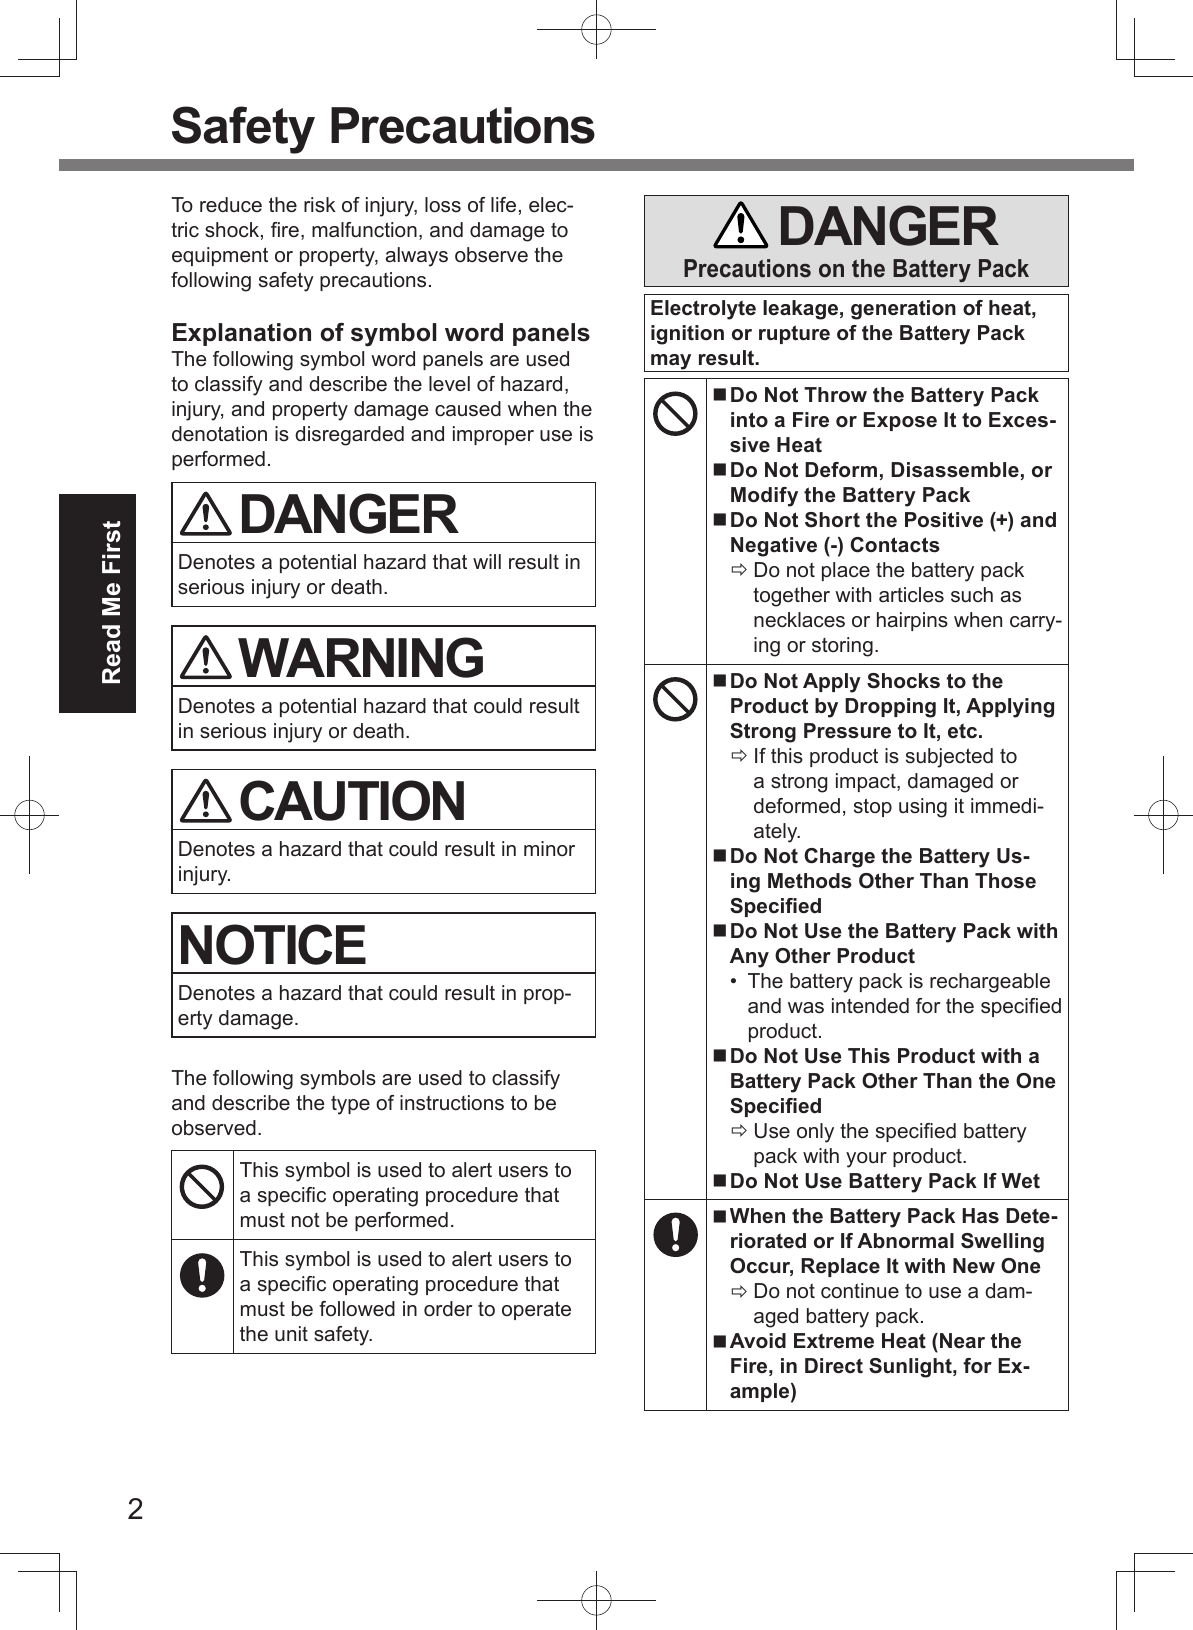 2Read Me First Safety PrecautionsTo reduce the risk of injury, loss of life, elec-tric shock, ﬁ re, malfunction, and damage to equipment or property, always observe the following safety precautions.Explanation of symbol word panelsThe following symbol word panels are used to classify and describe the level of hazard, injury, and property damage caused when the denotation is disregarded and improper use is performed. DANGERDenotes a potential hazard that will result in serious injury or death. WARNINGDenotes a potential hazard that could result in serious injury or death. CAUTIONDenotes a hazard that could result in minor injury.NOTICEDenotes a hazard that could result in prop-erty damage.The following symbols are used to classify and describe the type of instructions to be observed.This symbol is used to alert users to a speciﬁ c operating procedure that must not be performed.This symbol is used to alert users to a speciﬁ c operating procedure that must be followed in order to operate the unit safety. DANGERPrecautions on the Battery PackElectrolyte leakage, generation of heat, ignition or rupture of the Battery Pack may result. Do Not Throw the Battery Pack into a Fire or Expose It to Exces-sive Heat Do Not Deform, Disassemble, or Modify the Battery Pack Do Not Short the Positive (+) and Negative (-) Contacts Do not place the battery pack together with articles such as necklaces or hairpins when carry-ing or storing. Do Not Apply Shocks to the Product by Dropping It, Applying Strong Pressure to It, etc. If this product is subjected to a strong impact, damaged or deformed, stop using it immedi-ately. Do Not Charge the Battery Us-ing Methods Other Than Those Speciﬁ ed Do Not Use the Battery Pack with Any Other Product•  The battery pack is rechargeable and was intended for the speciﬁ ed product. Do Not Use This Product with a Battery Pack Other Than the One Speciﬁ ed Use only the speciﬁ ed battery pack with your product. Do Not Use Battery Pack If Wet When the Battery Pack Has Dete-riorated or If Abnormal Swelling Occur, Replace It with New One Do not continue to use a dam-aged battery pack. Avoid Extreme Heat (Near the Fire, in Direct Sunlight, for Ex-ample)